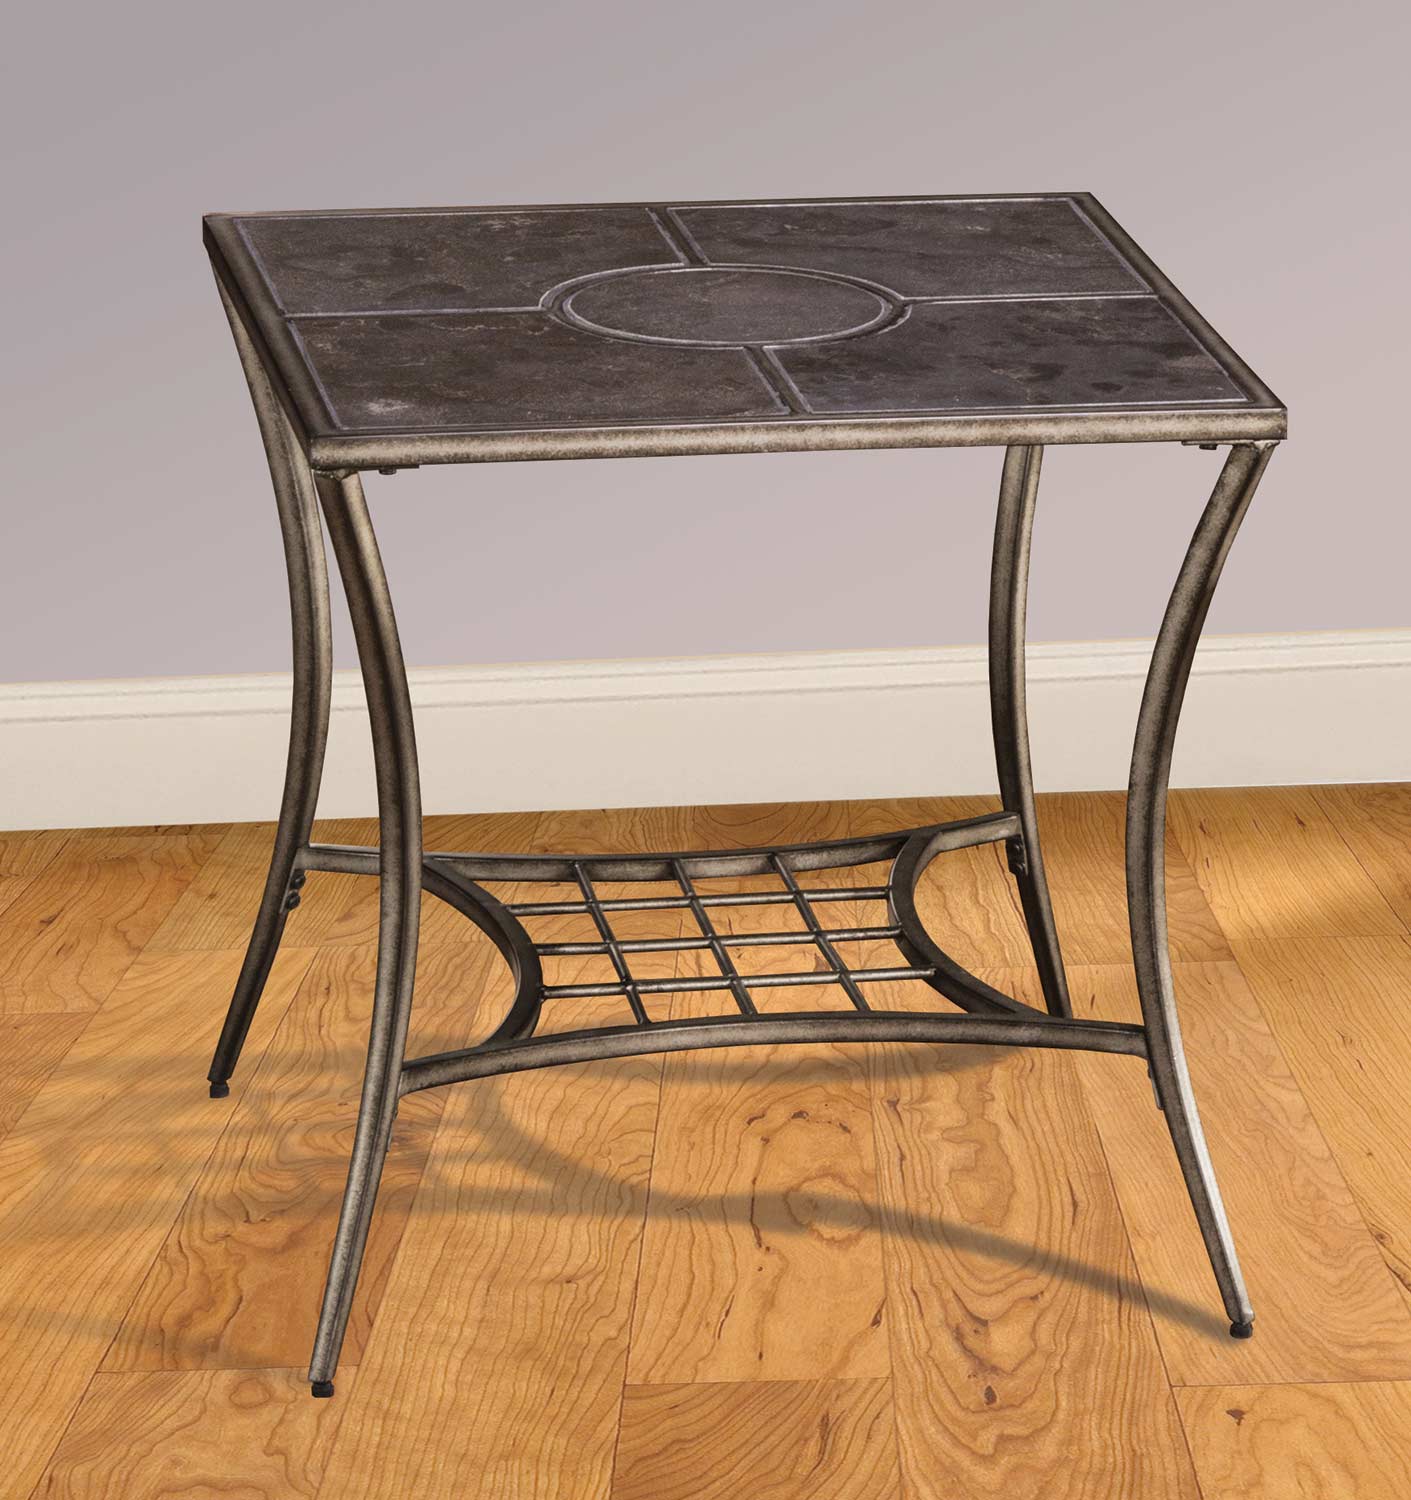 Hillsdale Wesson End Table - Black Pewter